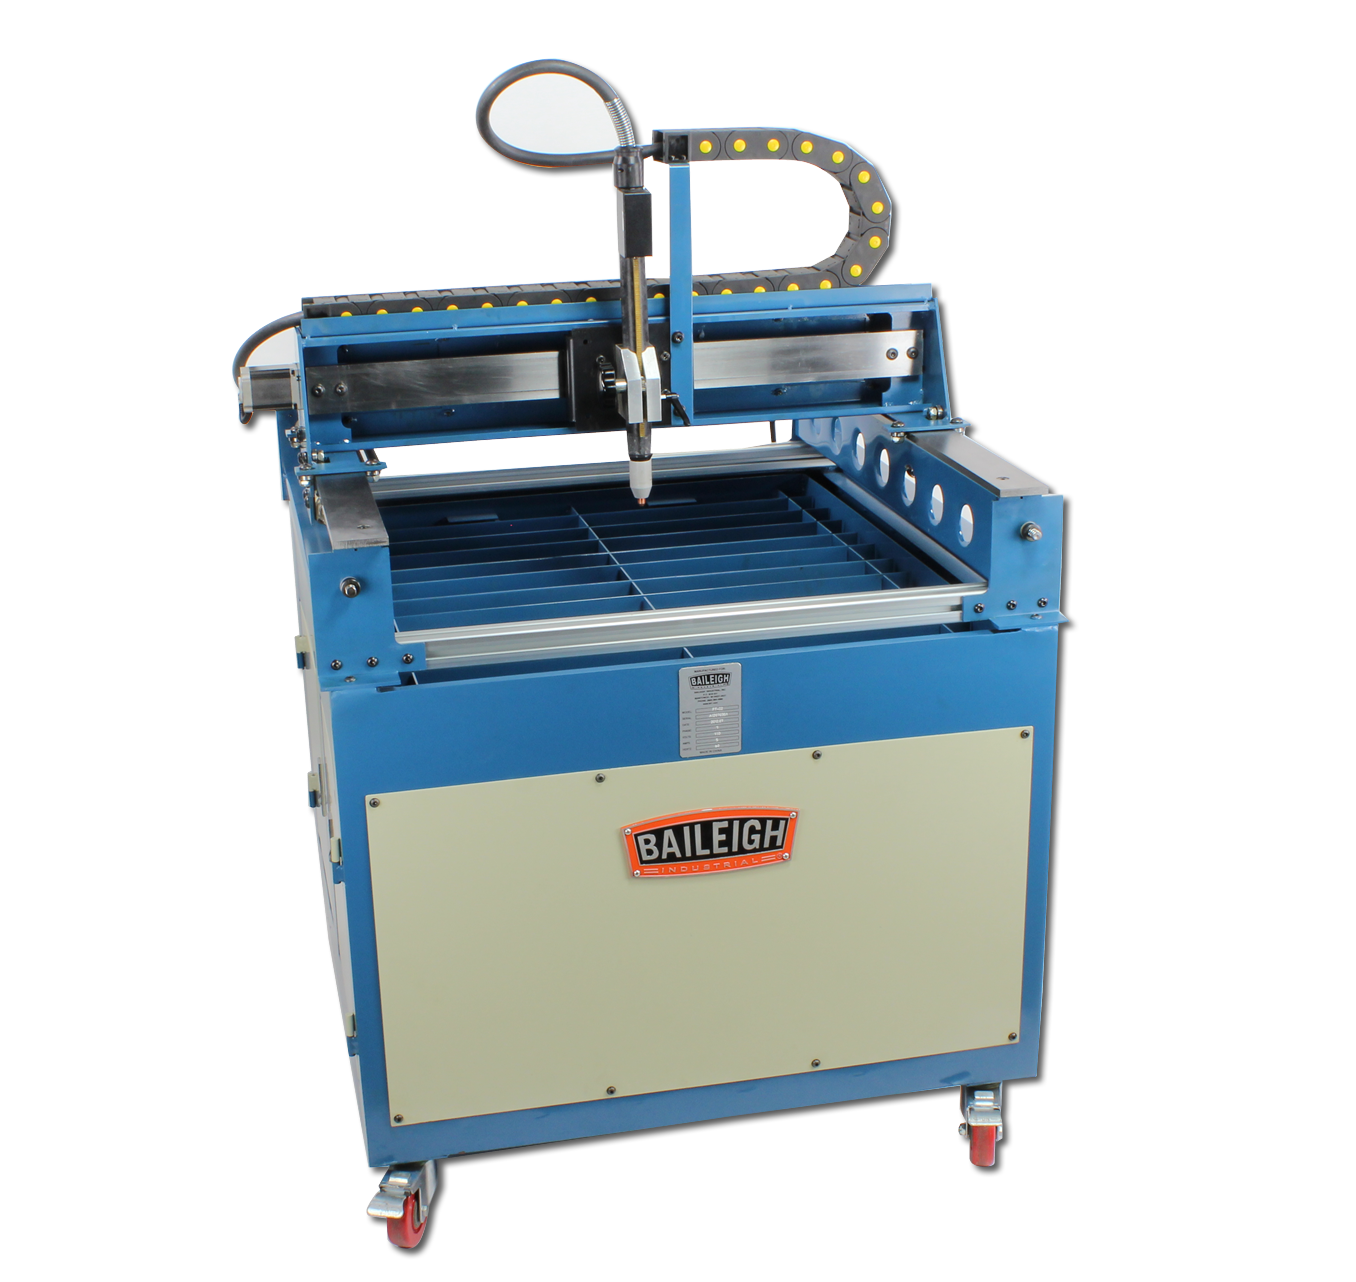 Baileigh PT-22 110V, CNC Plasma Cutting Table Includes, Software Package Two Torch Holders, and Waterbath